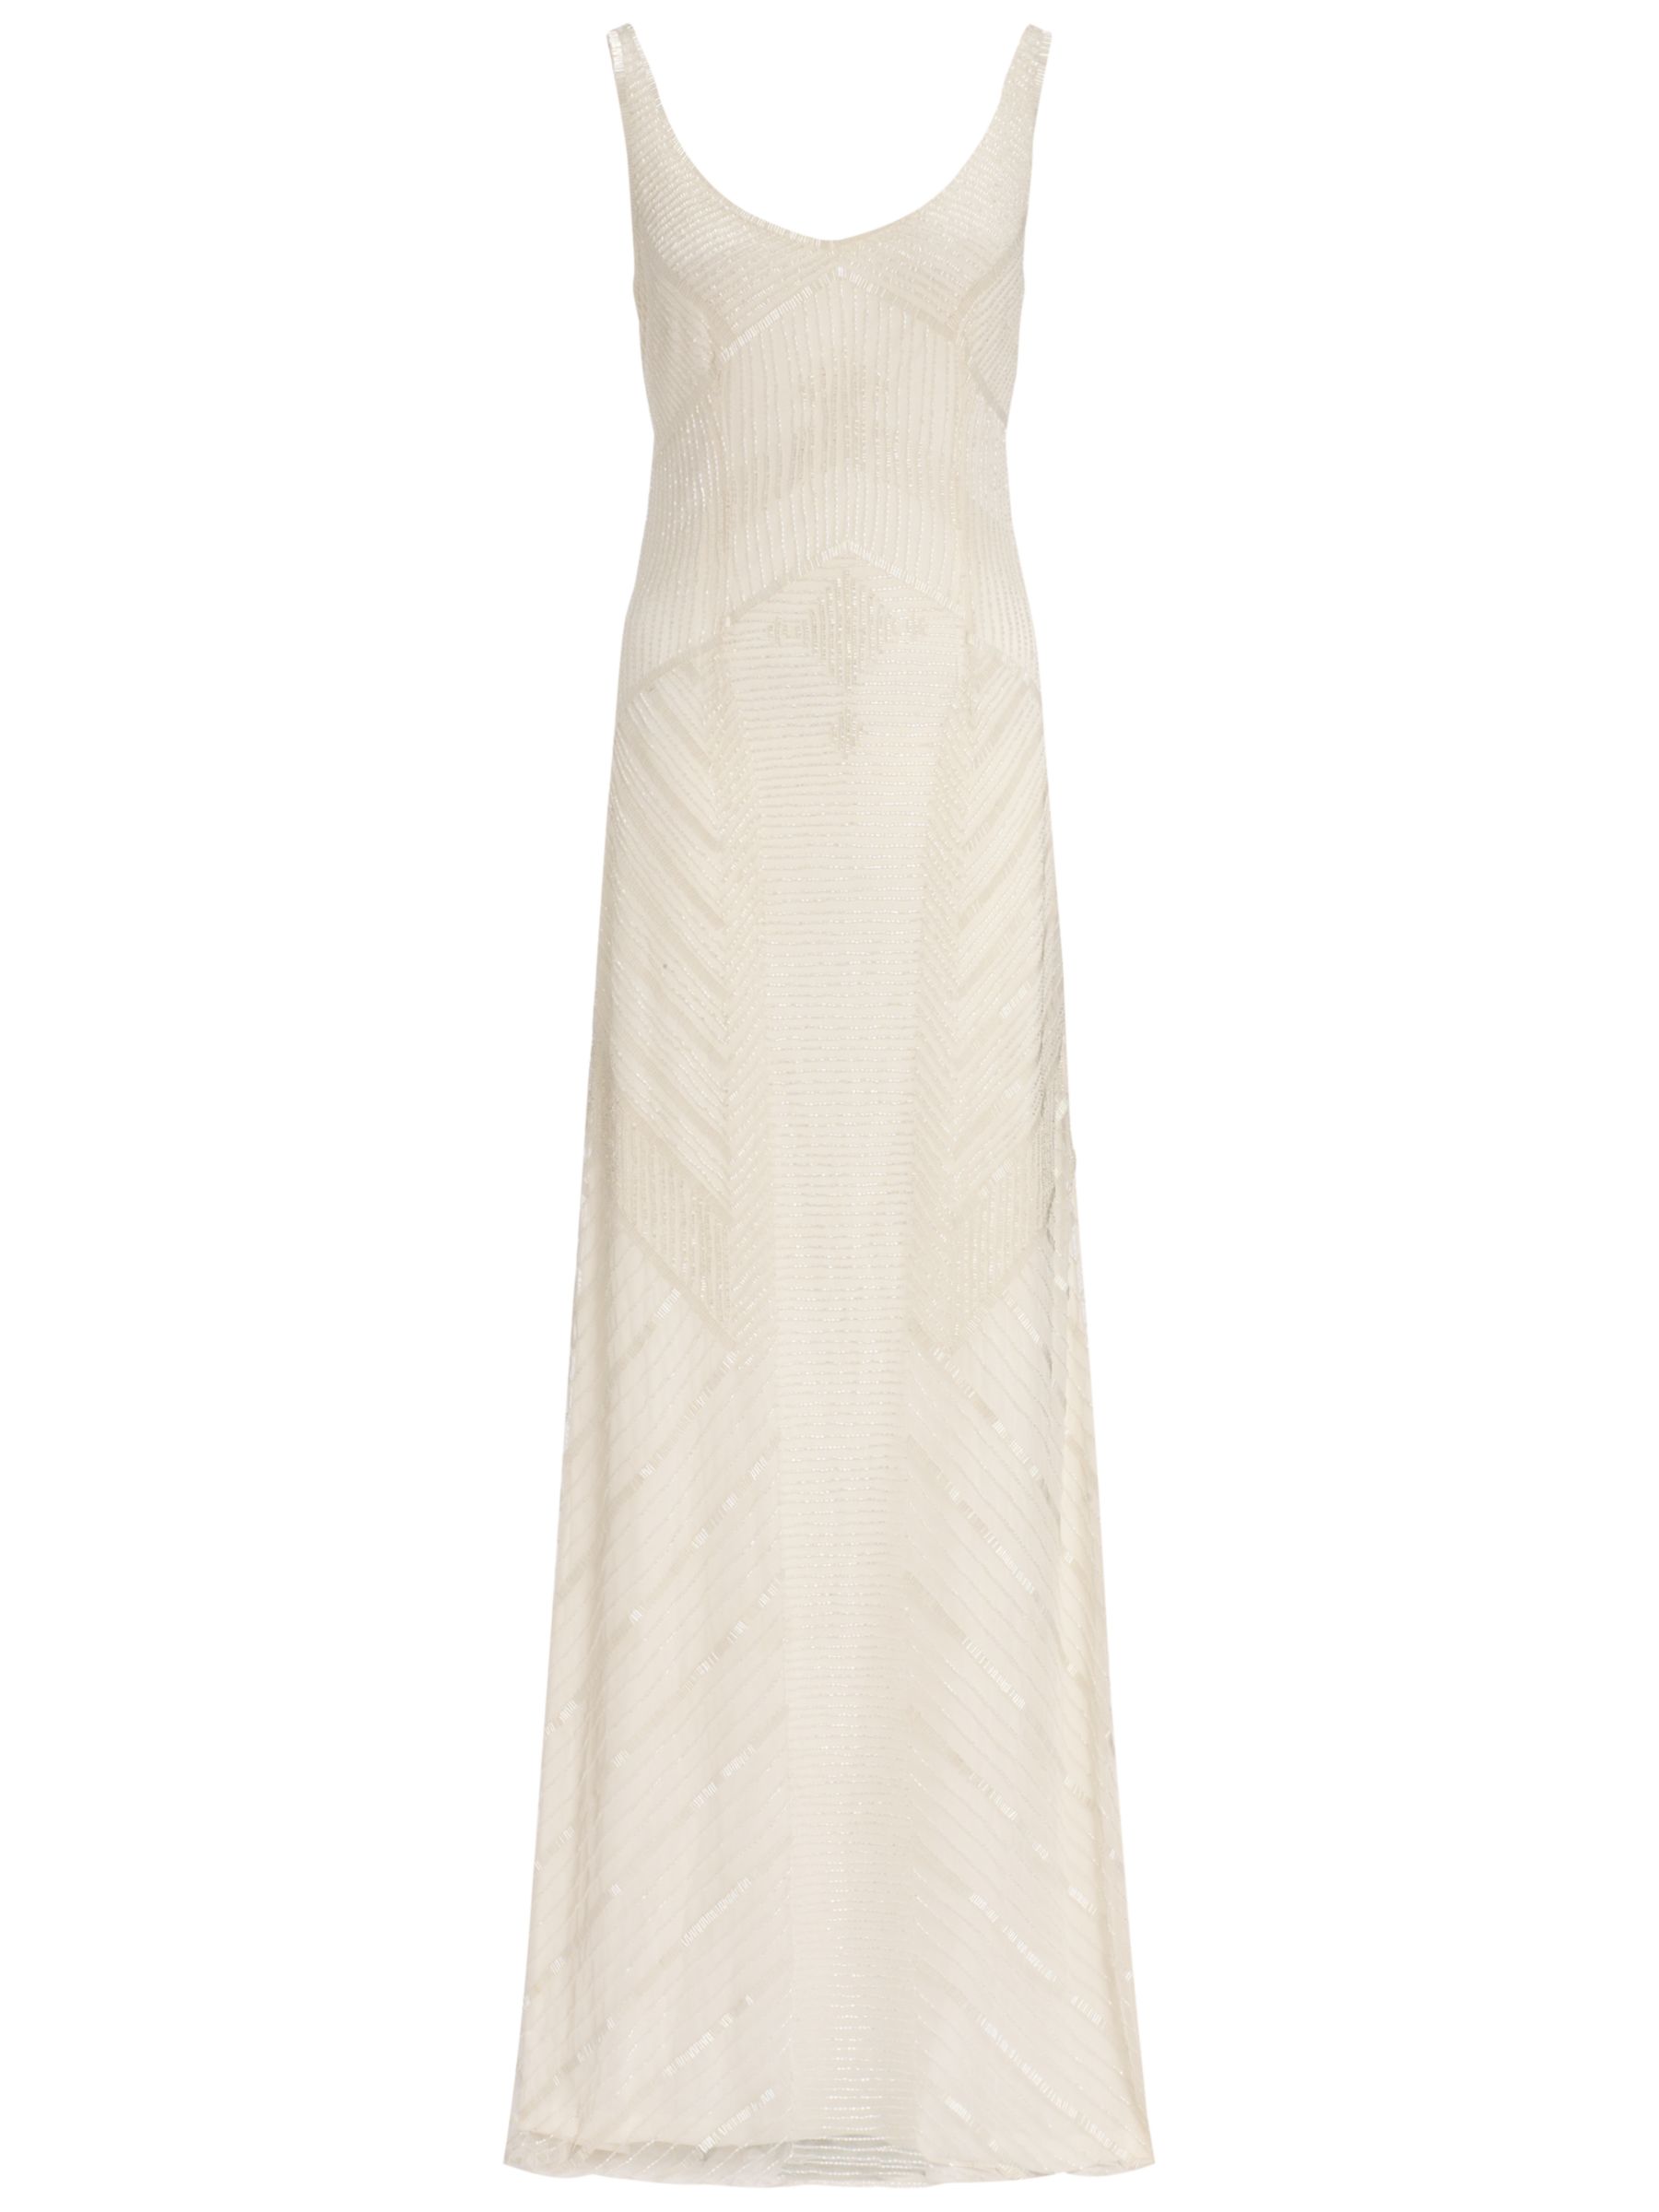 Adrianna Papell Wedding Long Beaded Gown Ivory £380.00 AT vintagedancer.com